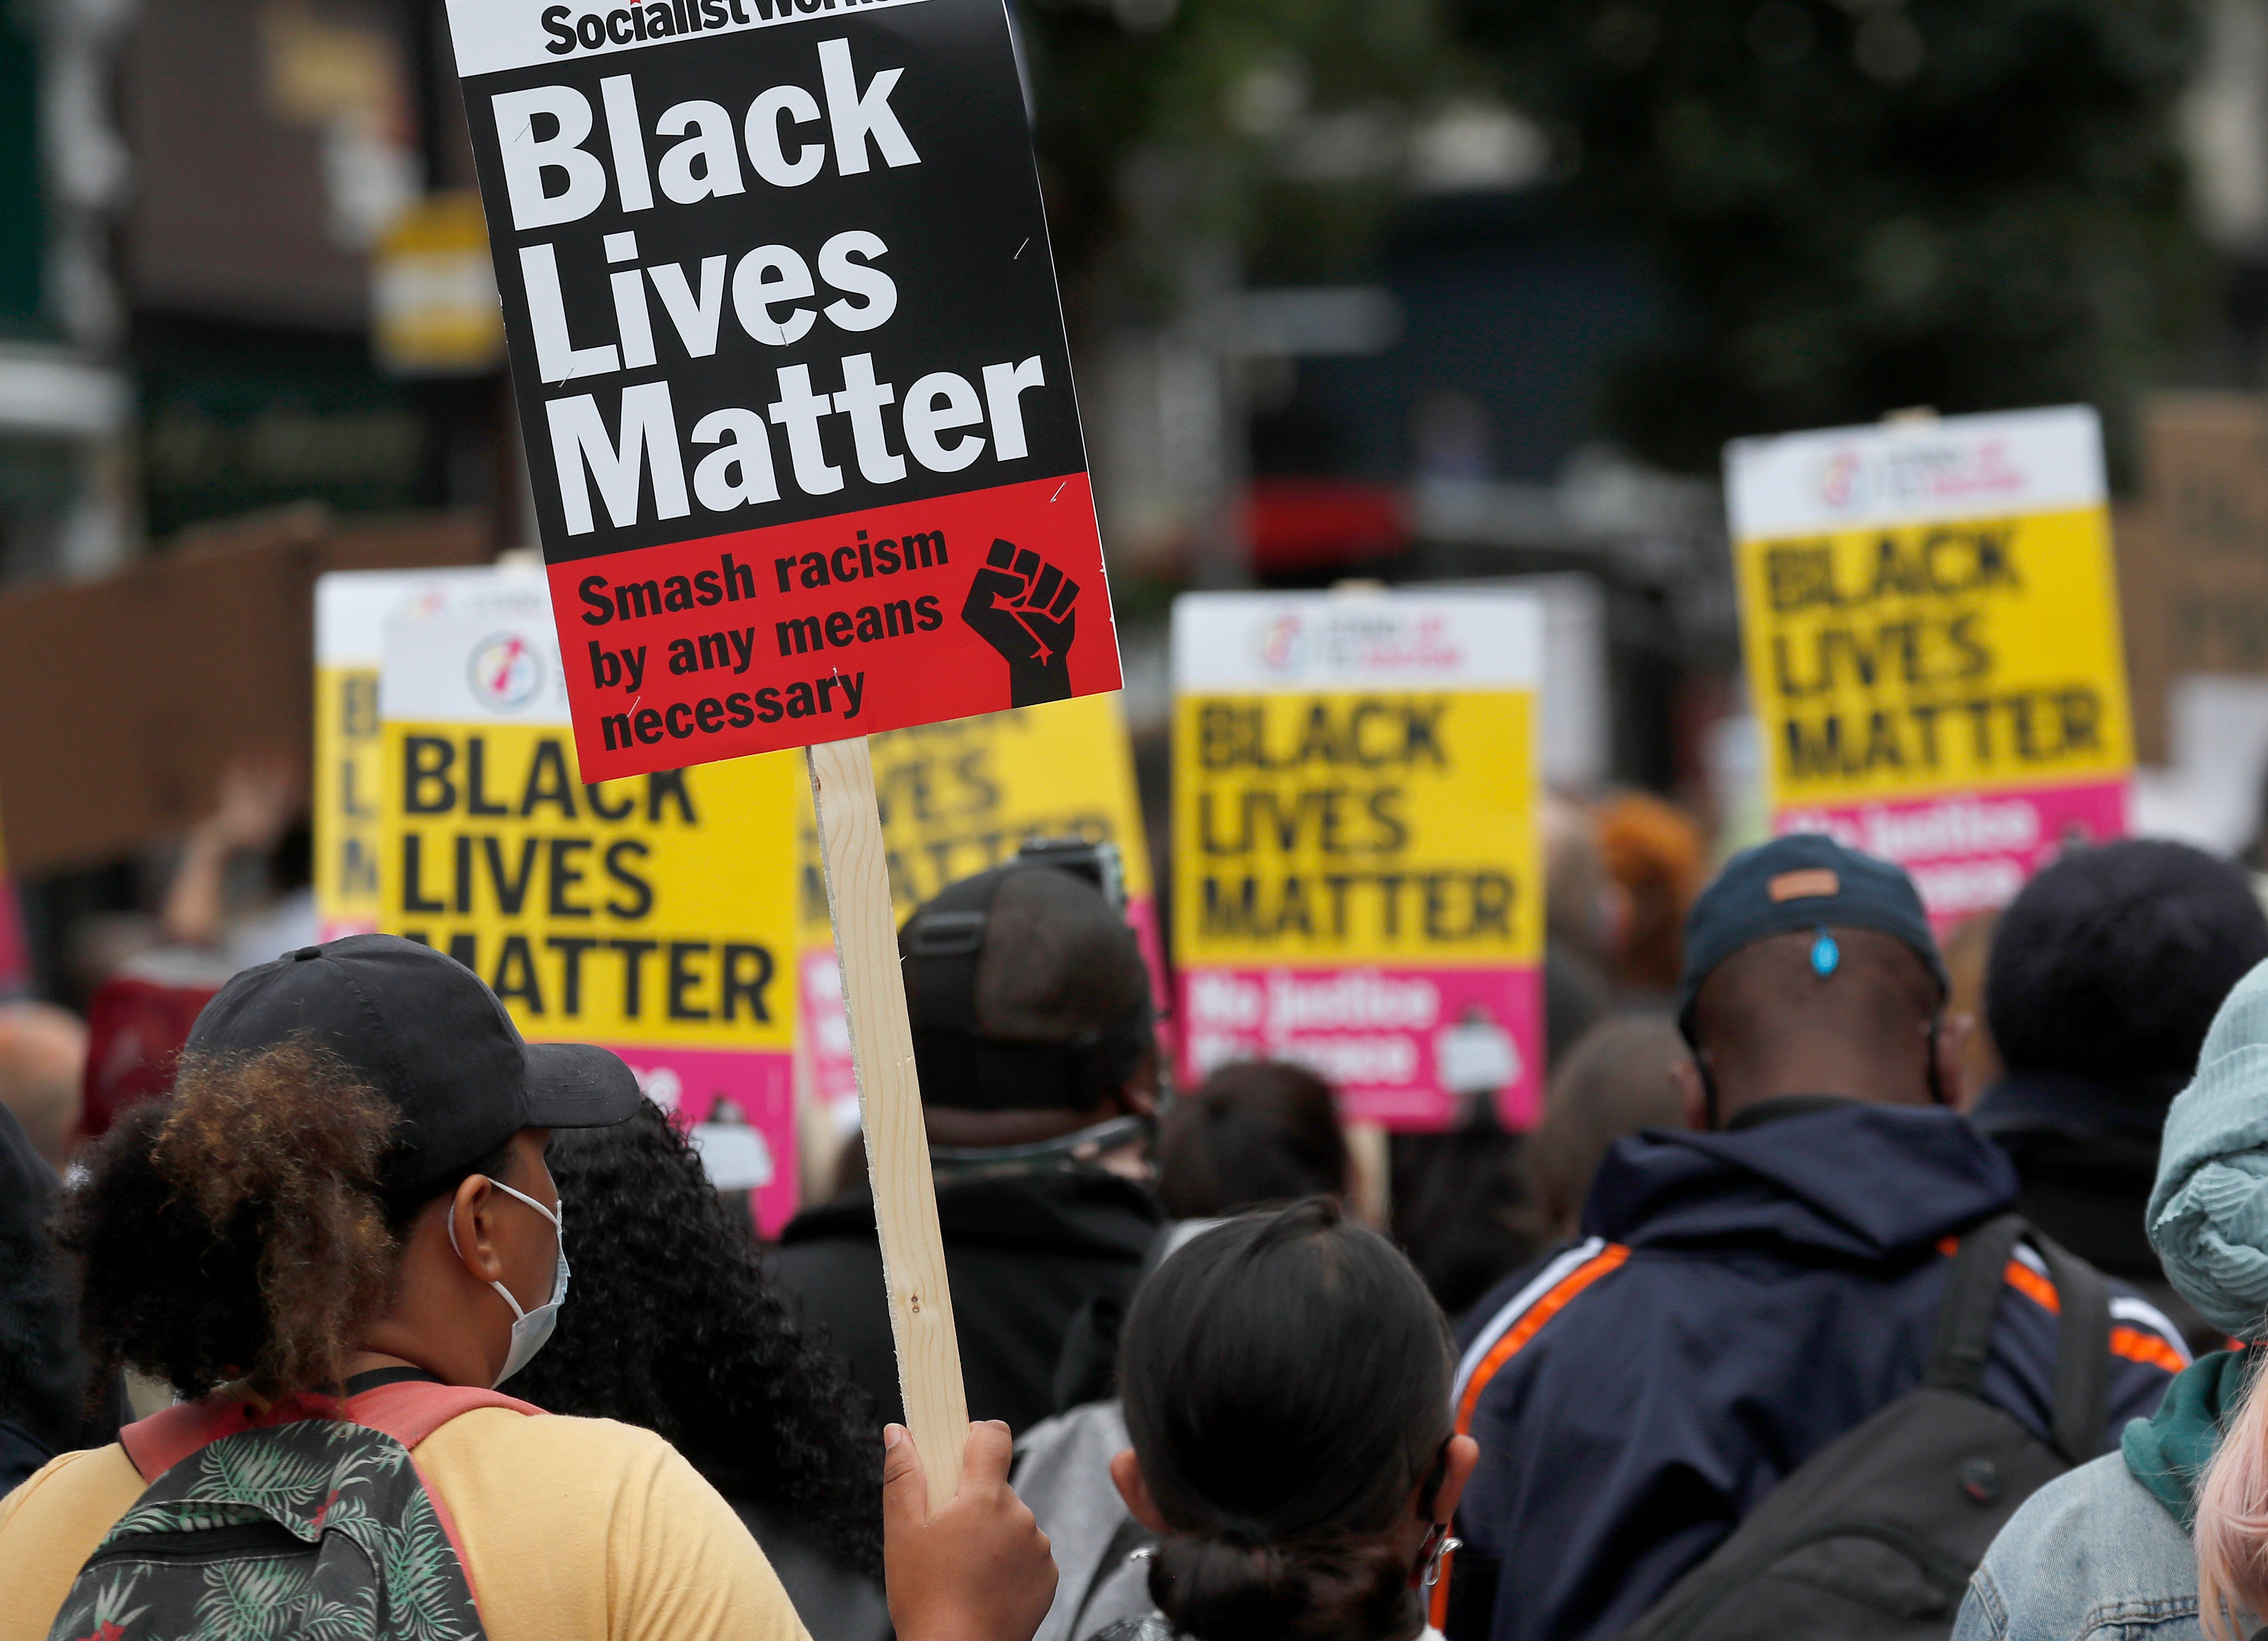 Black Lives Matter protesters hold posters as they march through London’s Notting Hill in August 2020